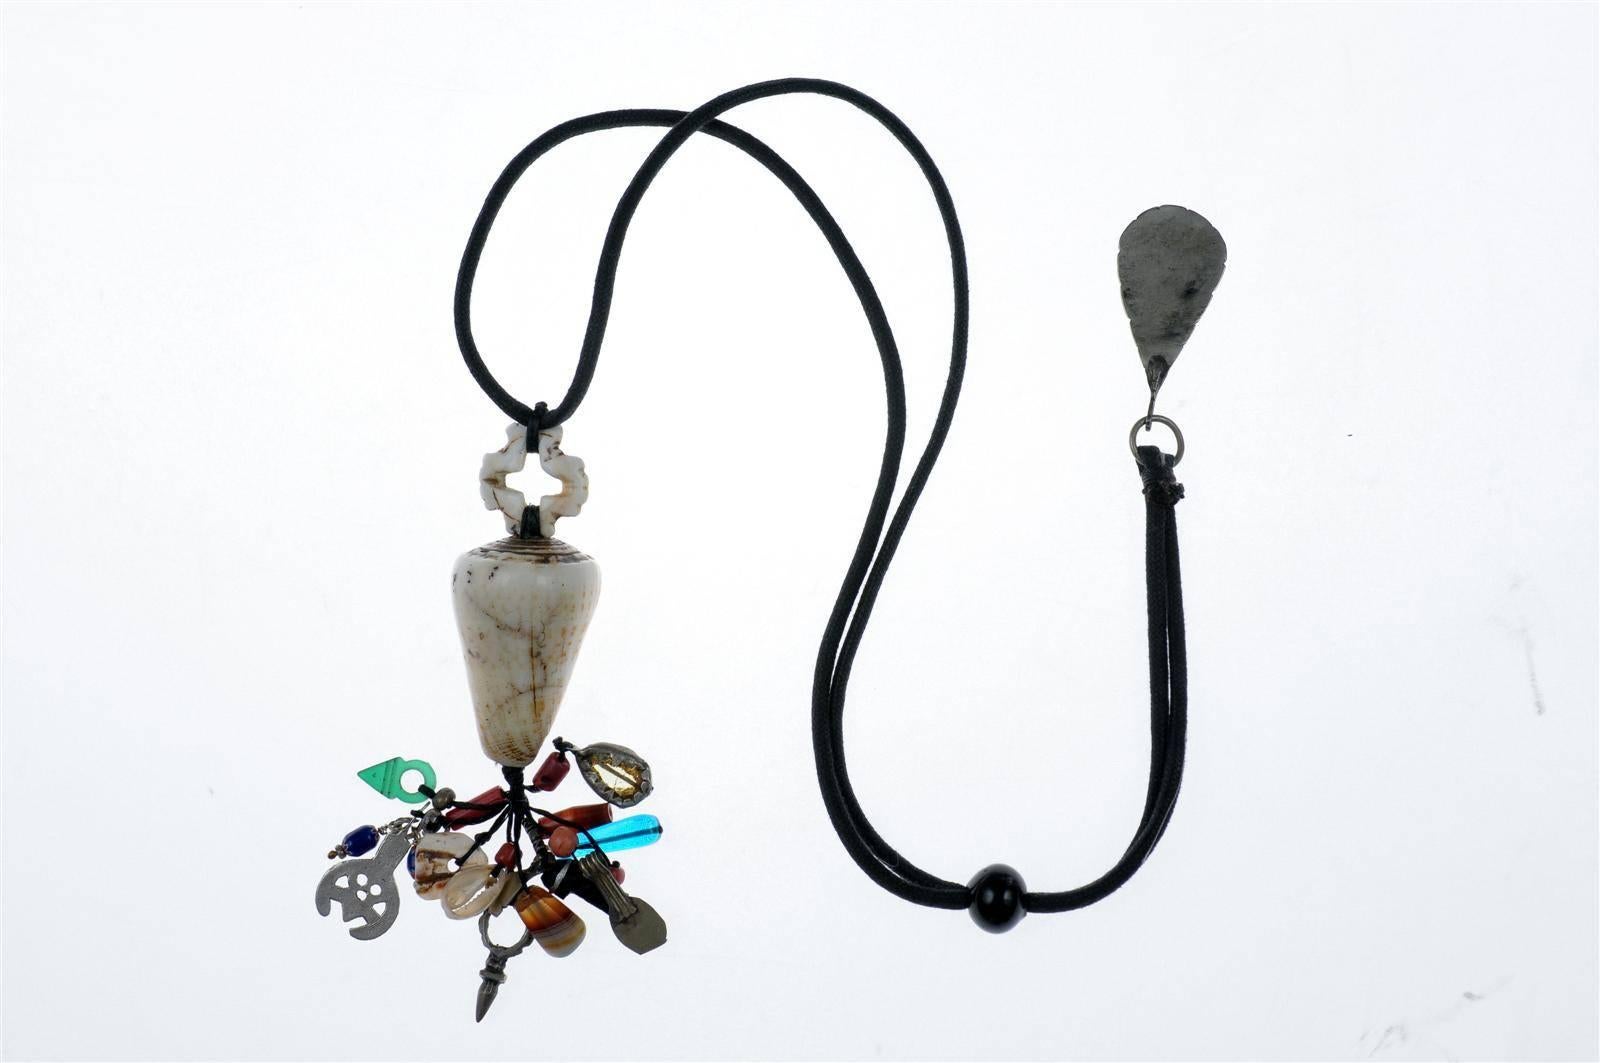 A custom-made necklace by Famous Moroccan Jeweler Chez Faouzi of Marrakech. Necklace features a conus shell along with a charming collection of Moroccan beads, shells and artifacts. Black cord necklace is adjustable to a maximum of 38.